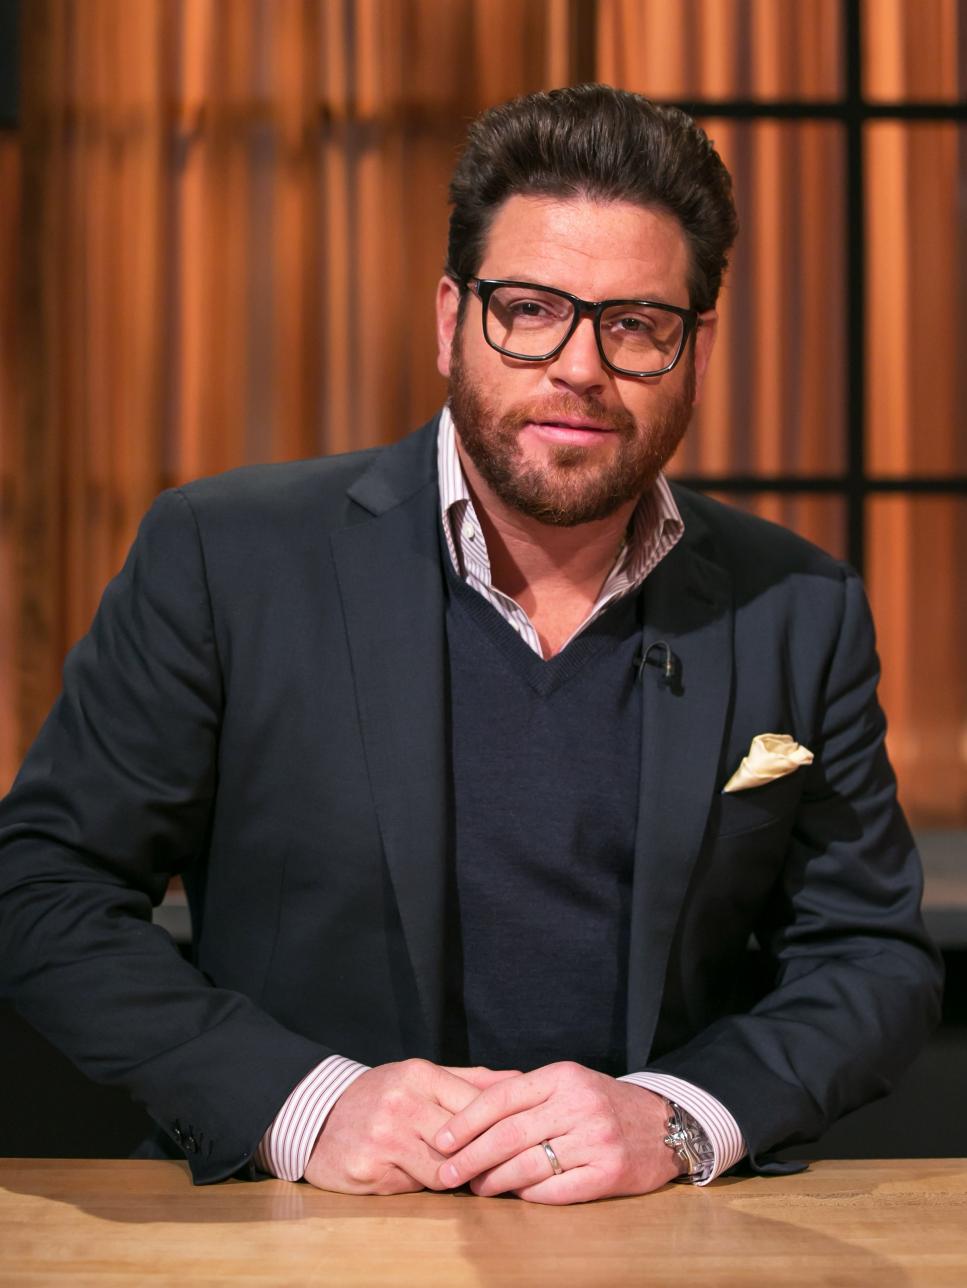 The 53-year old son of father (?) and mother(?) Scott Conant in 2024 photo. Scott Conant earned a  million dollar salary - leaving the net worth at 5 million in 2024